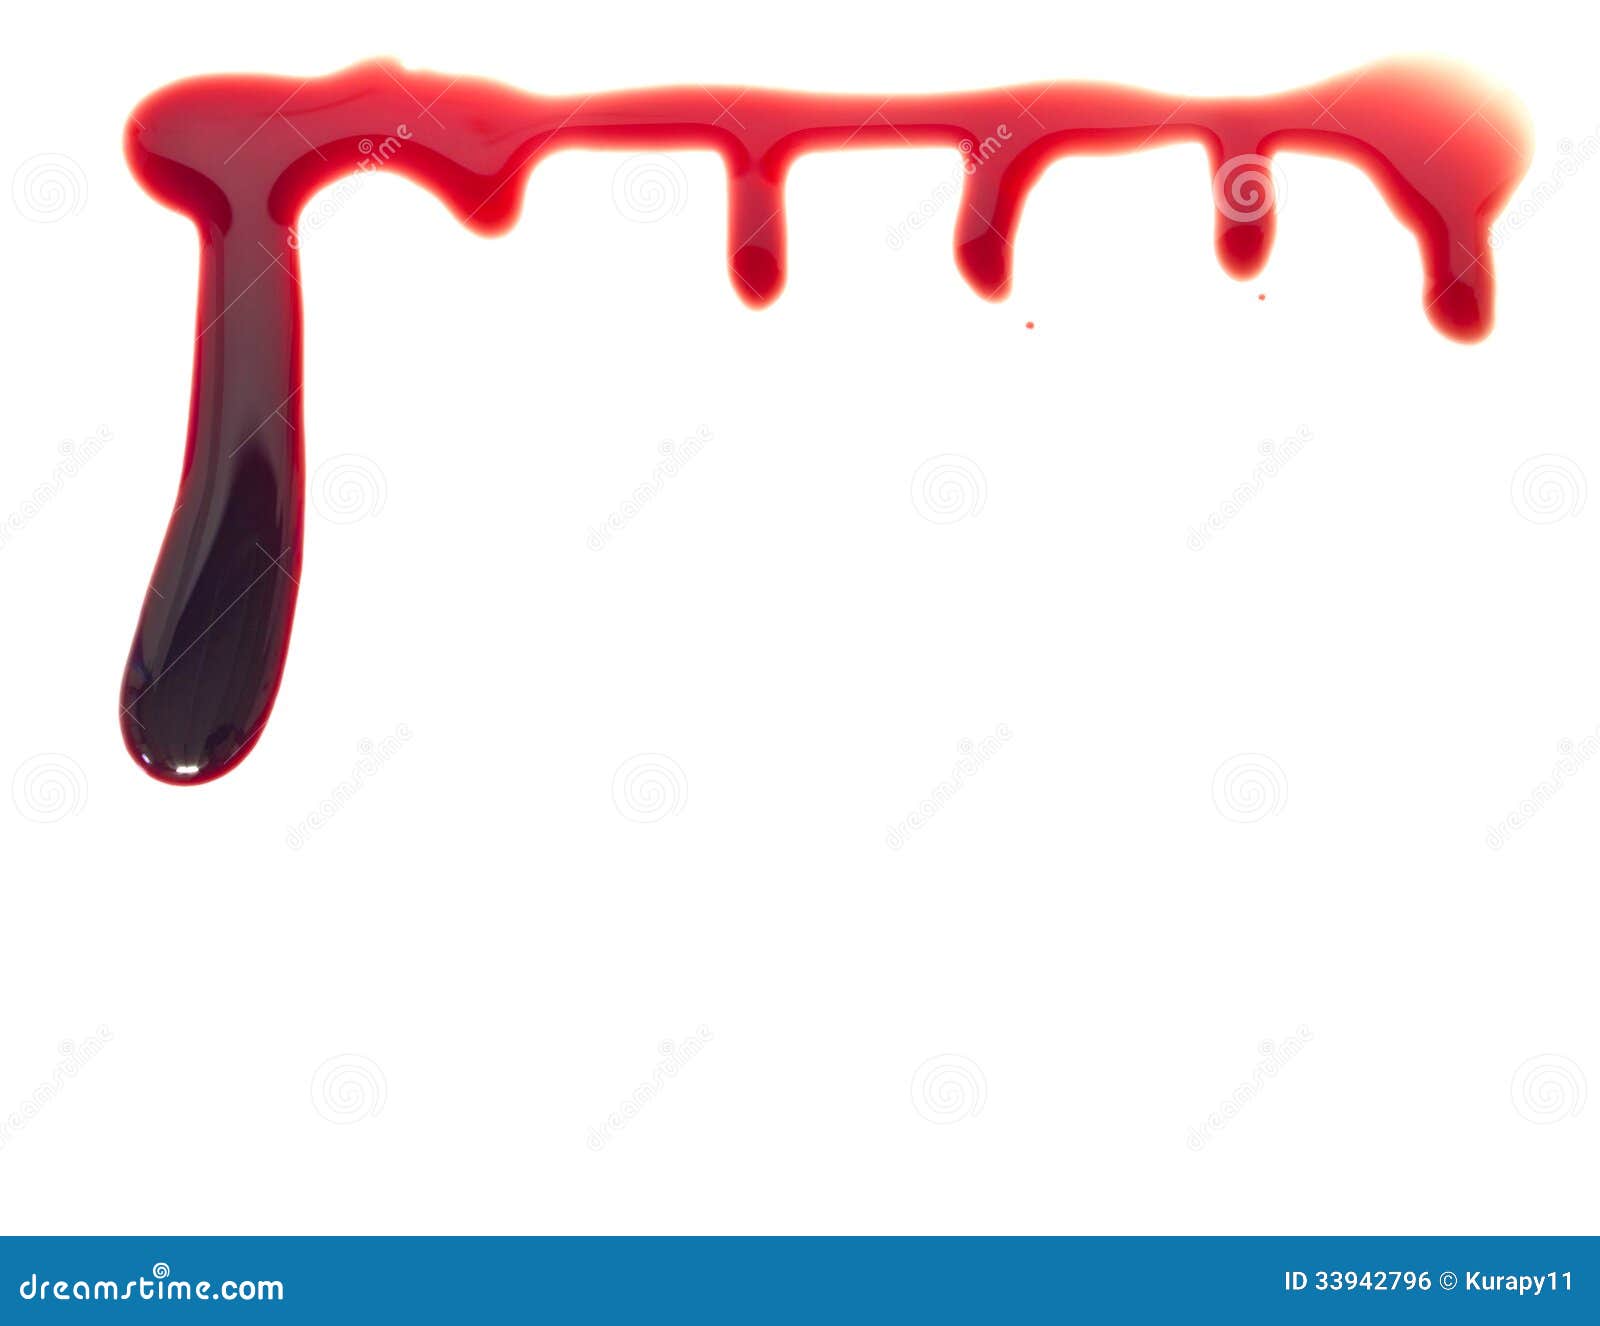 dripping blood clipart border - photo #34